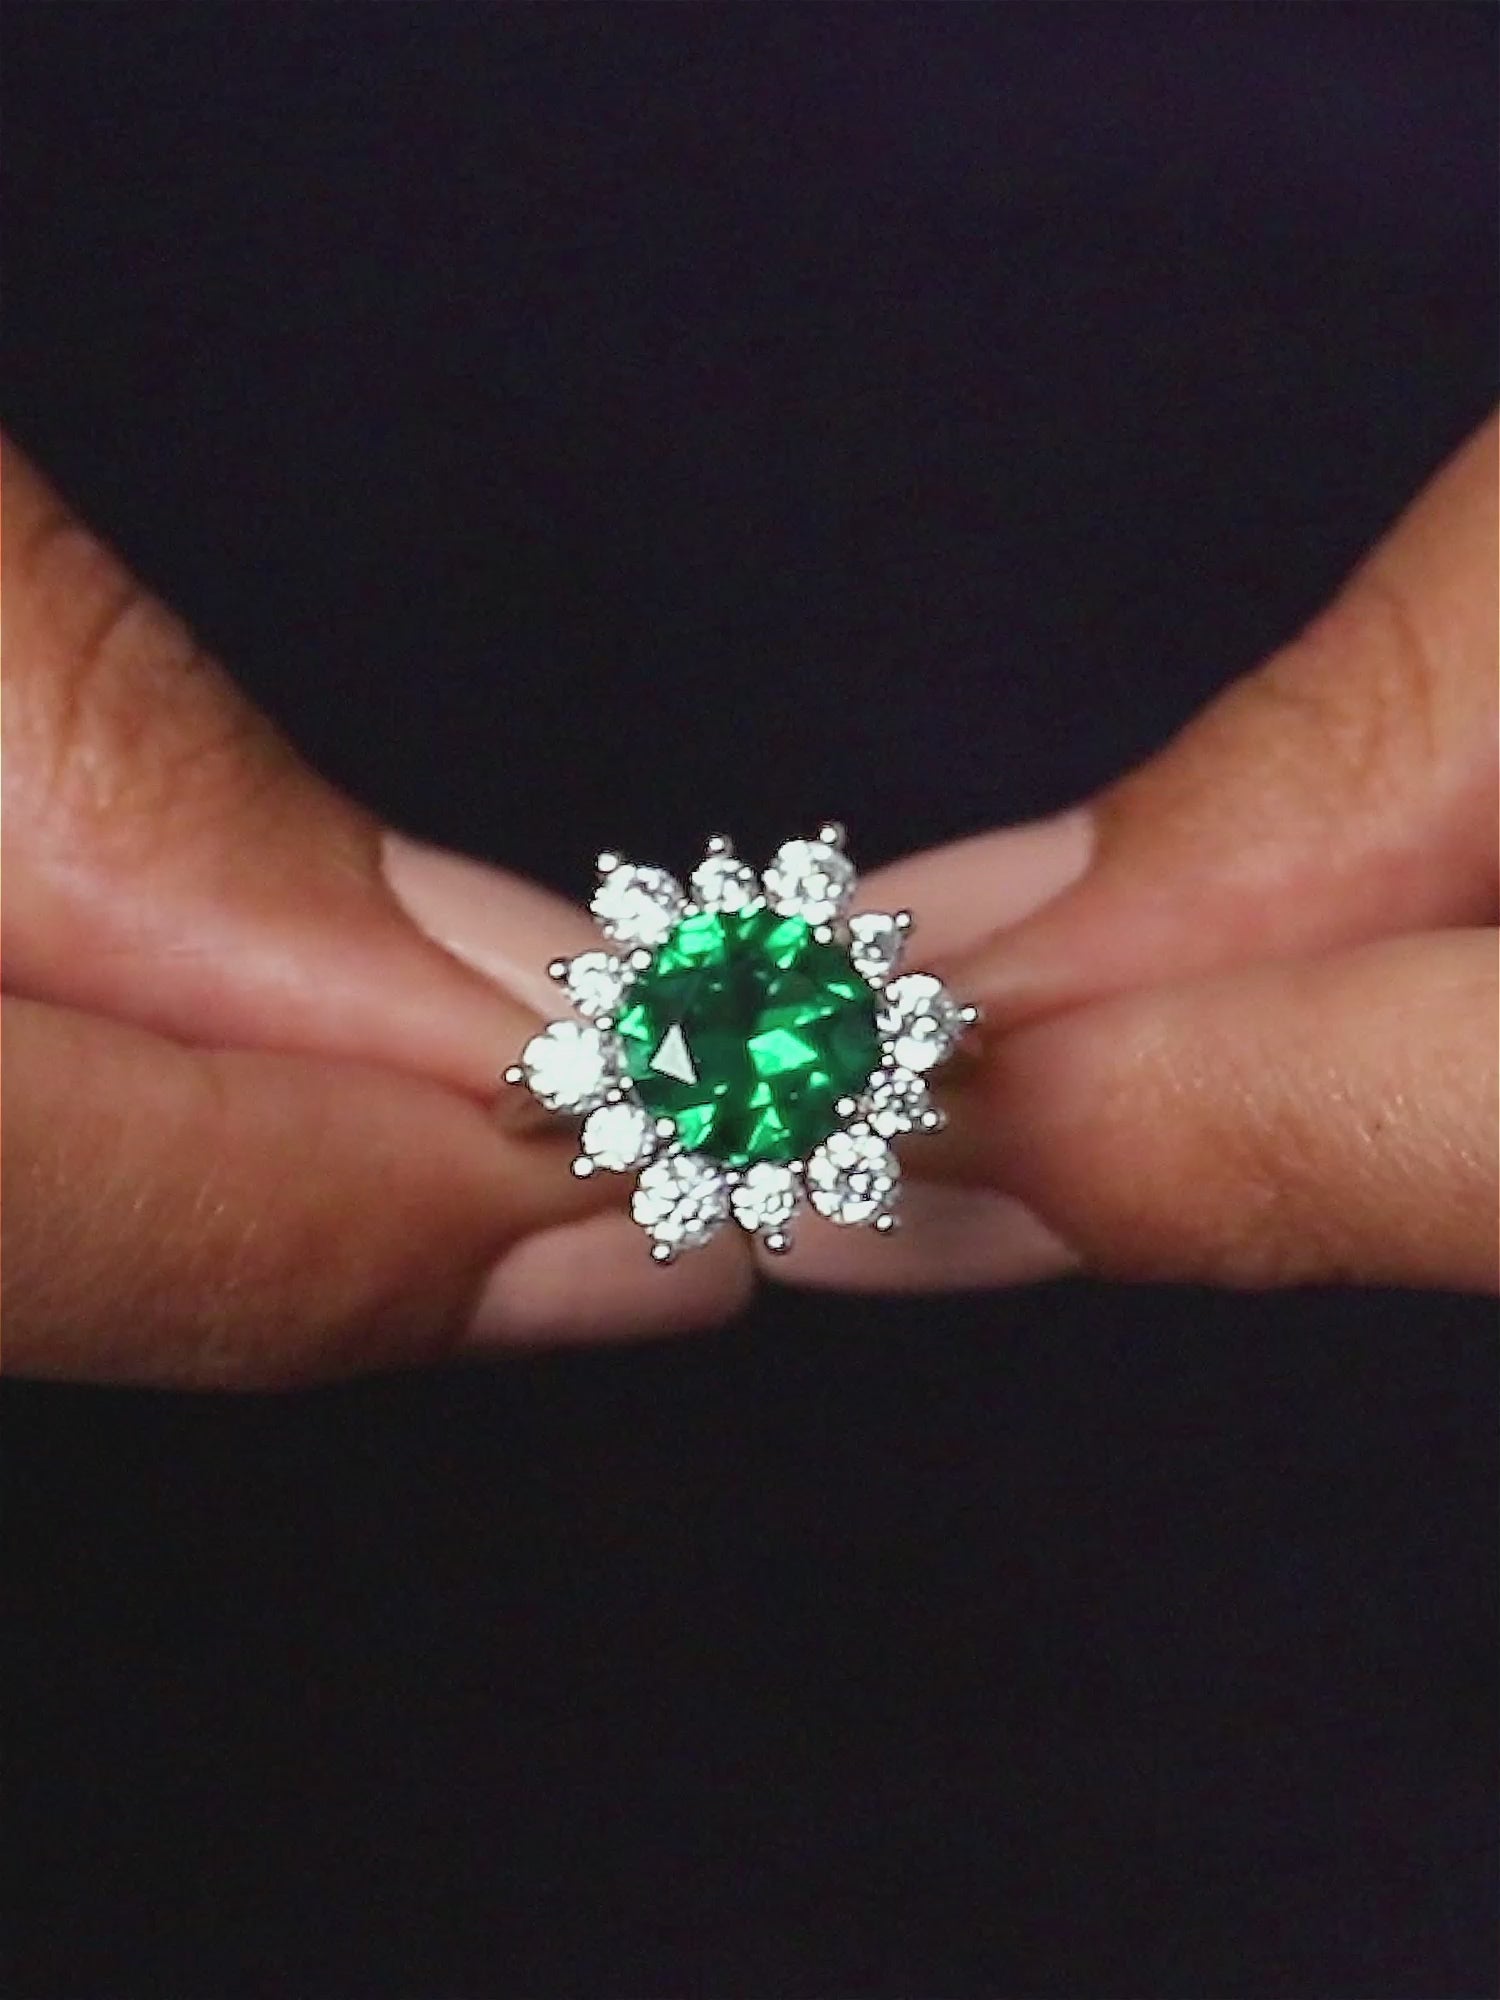 3.5 CARAT EMERALD FLOWER RING IN 925 SILVER